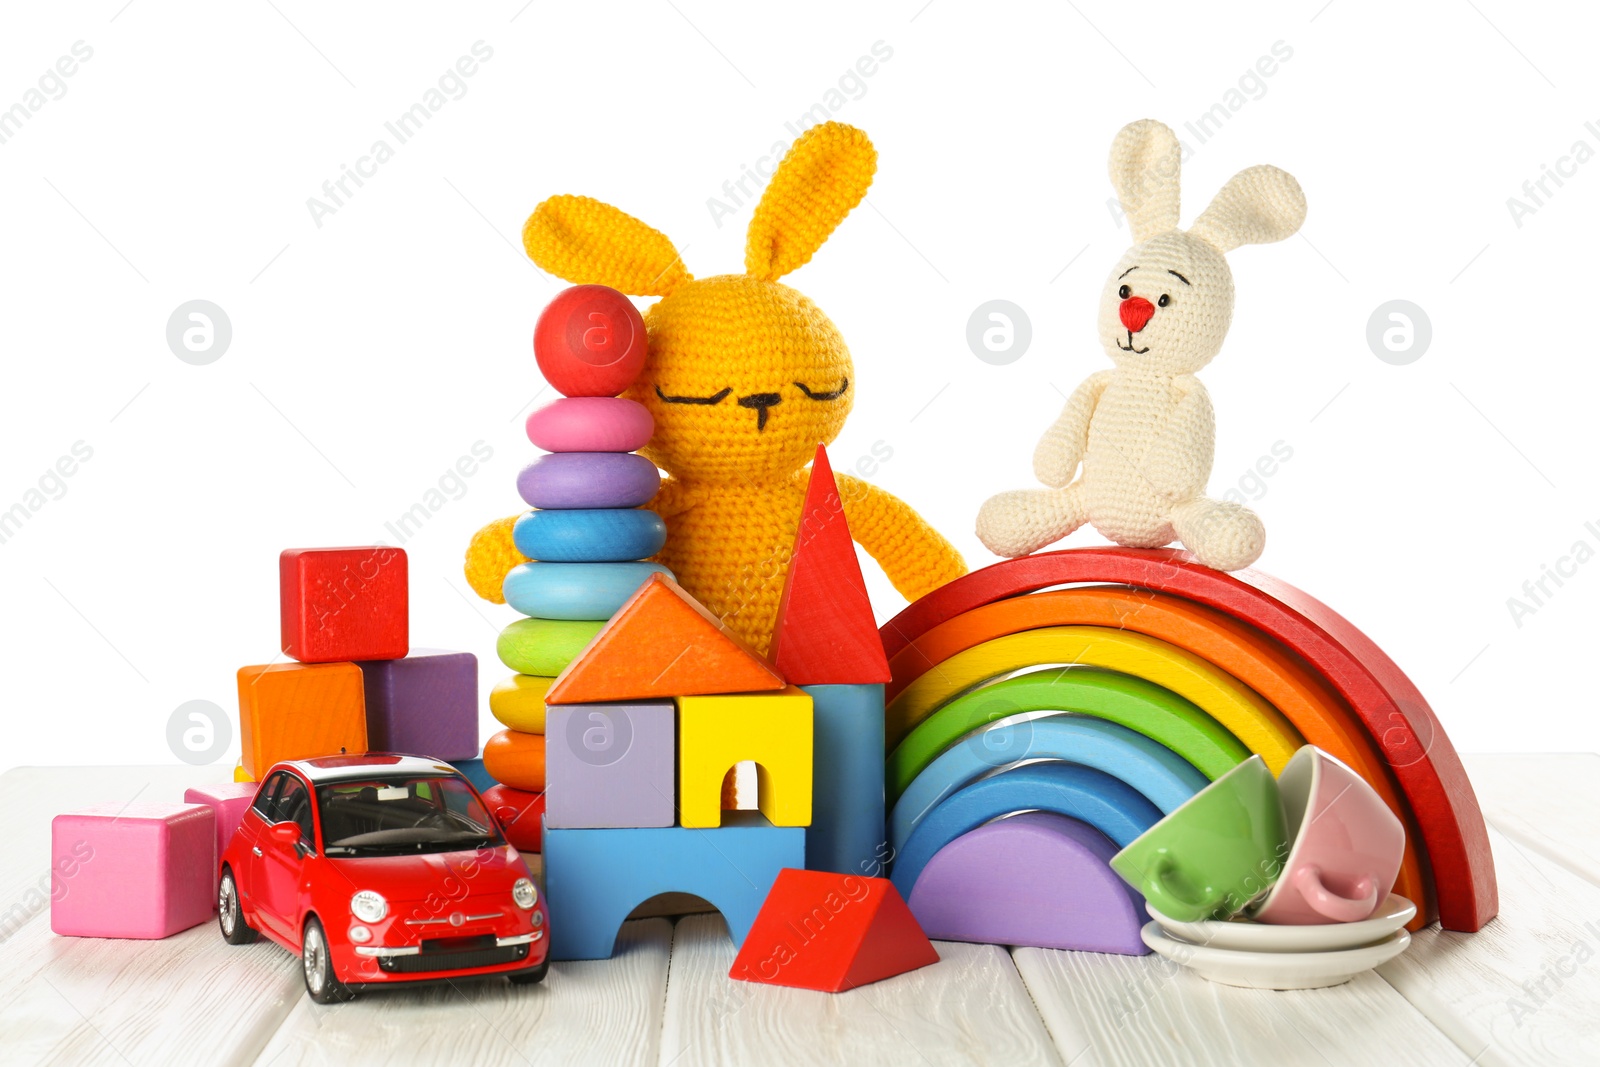 Photo of Different children's toys on wooden table against white background